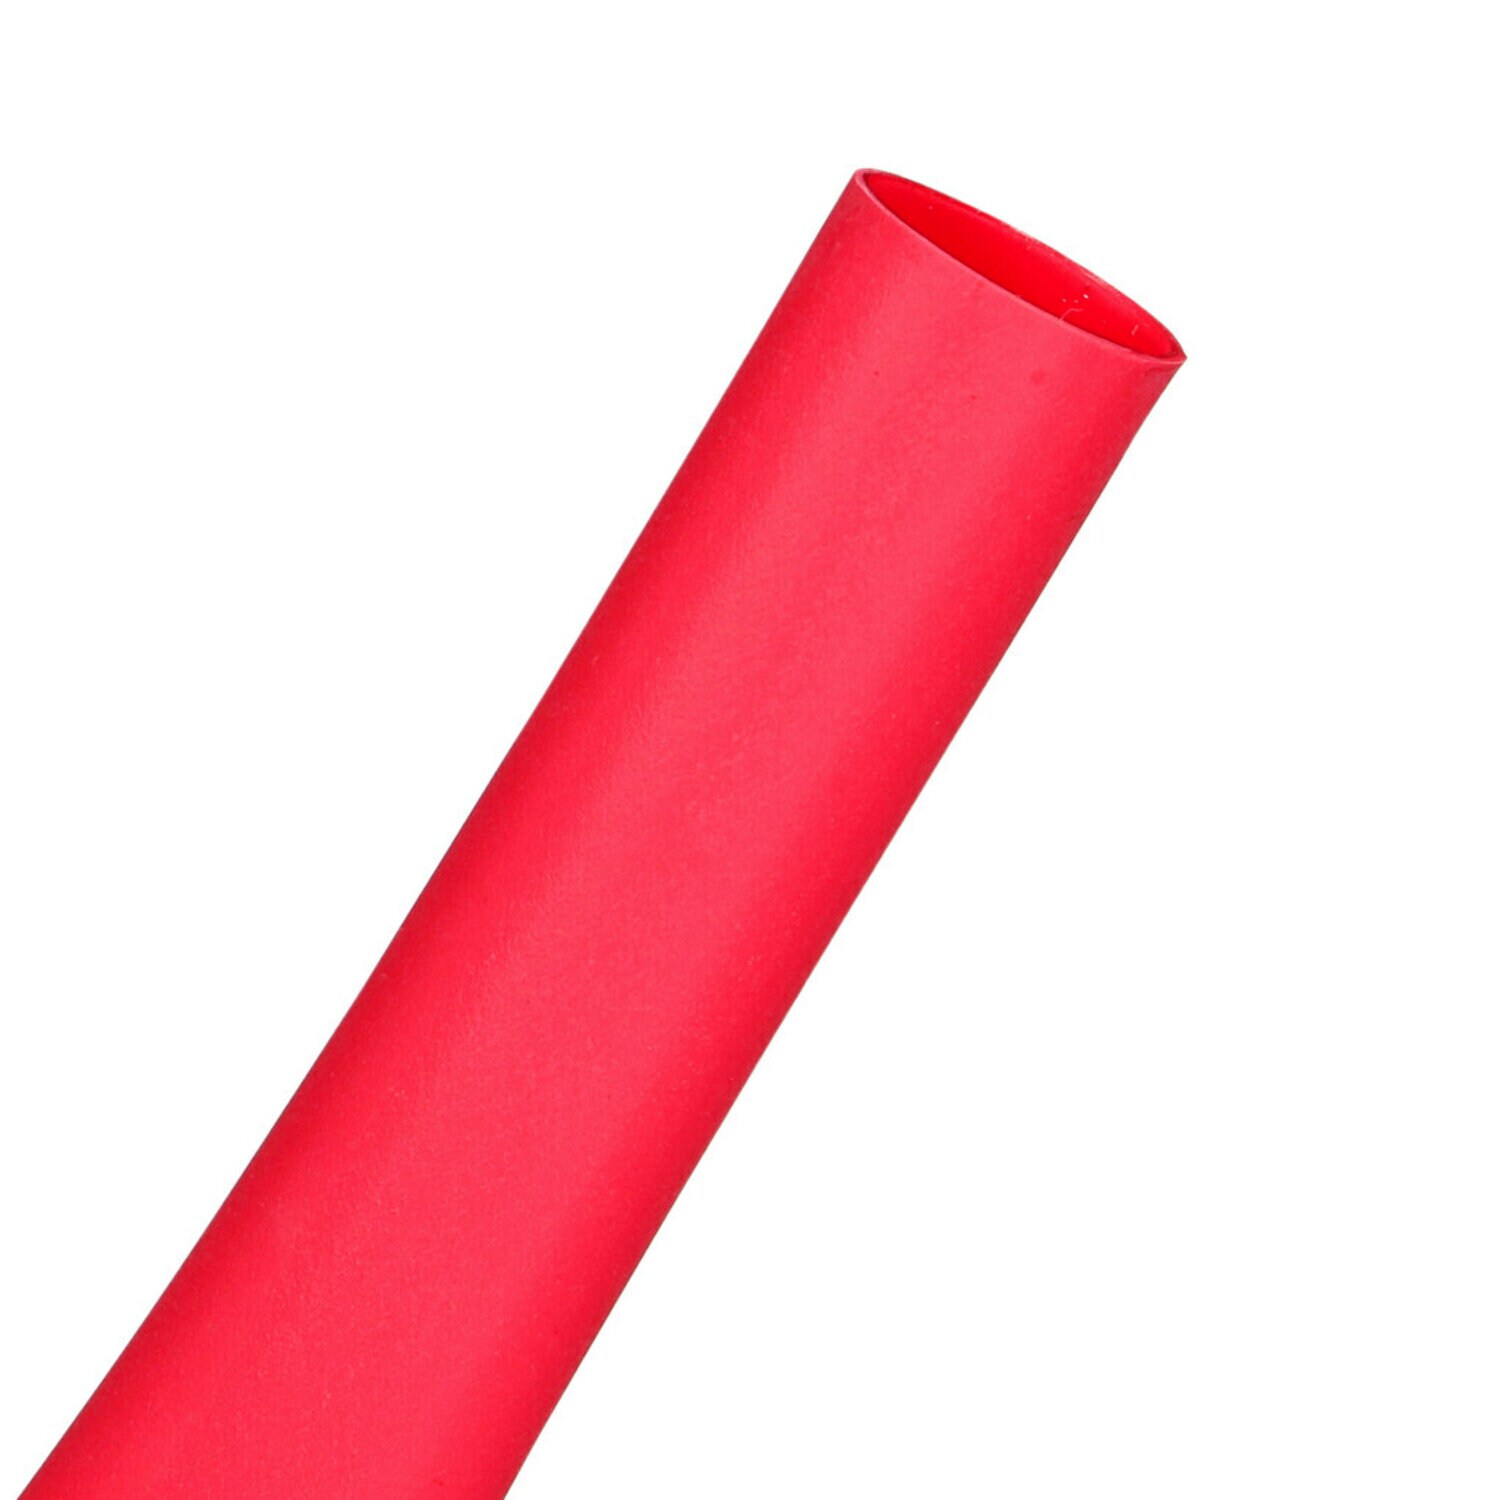 7010351703 - 3M Thin-Wall Heat Shrink Tubing EPS-300, Adhesive-Lined, 1/2-48"-Red-75
Pcs, 48 in length sticks, 75 pieces/case